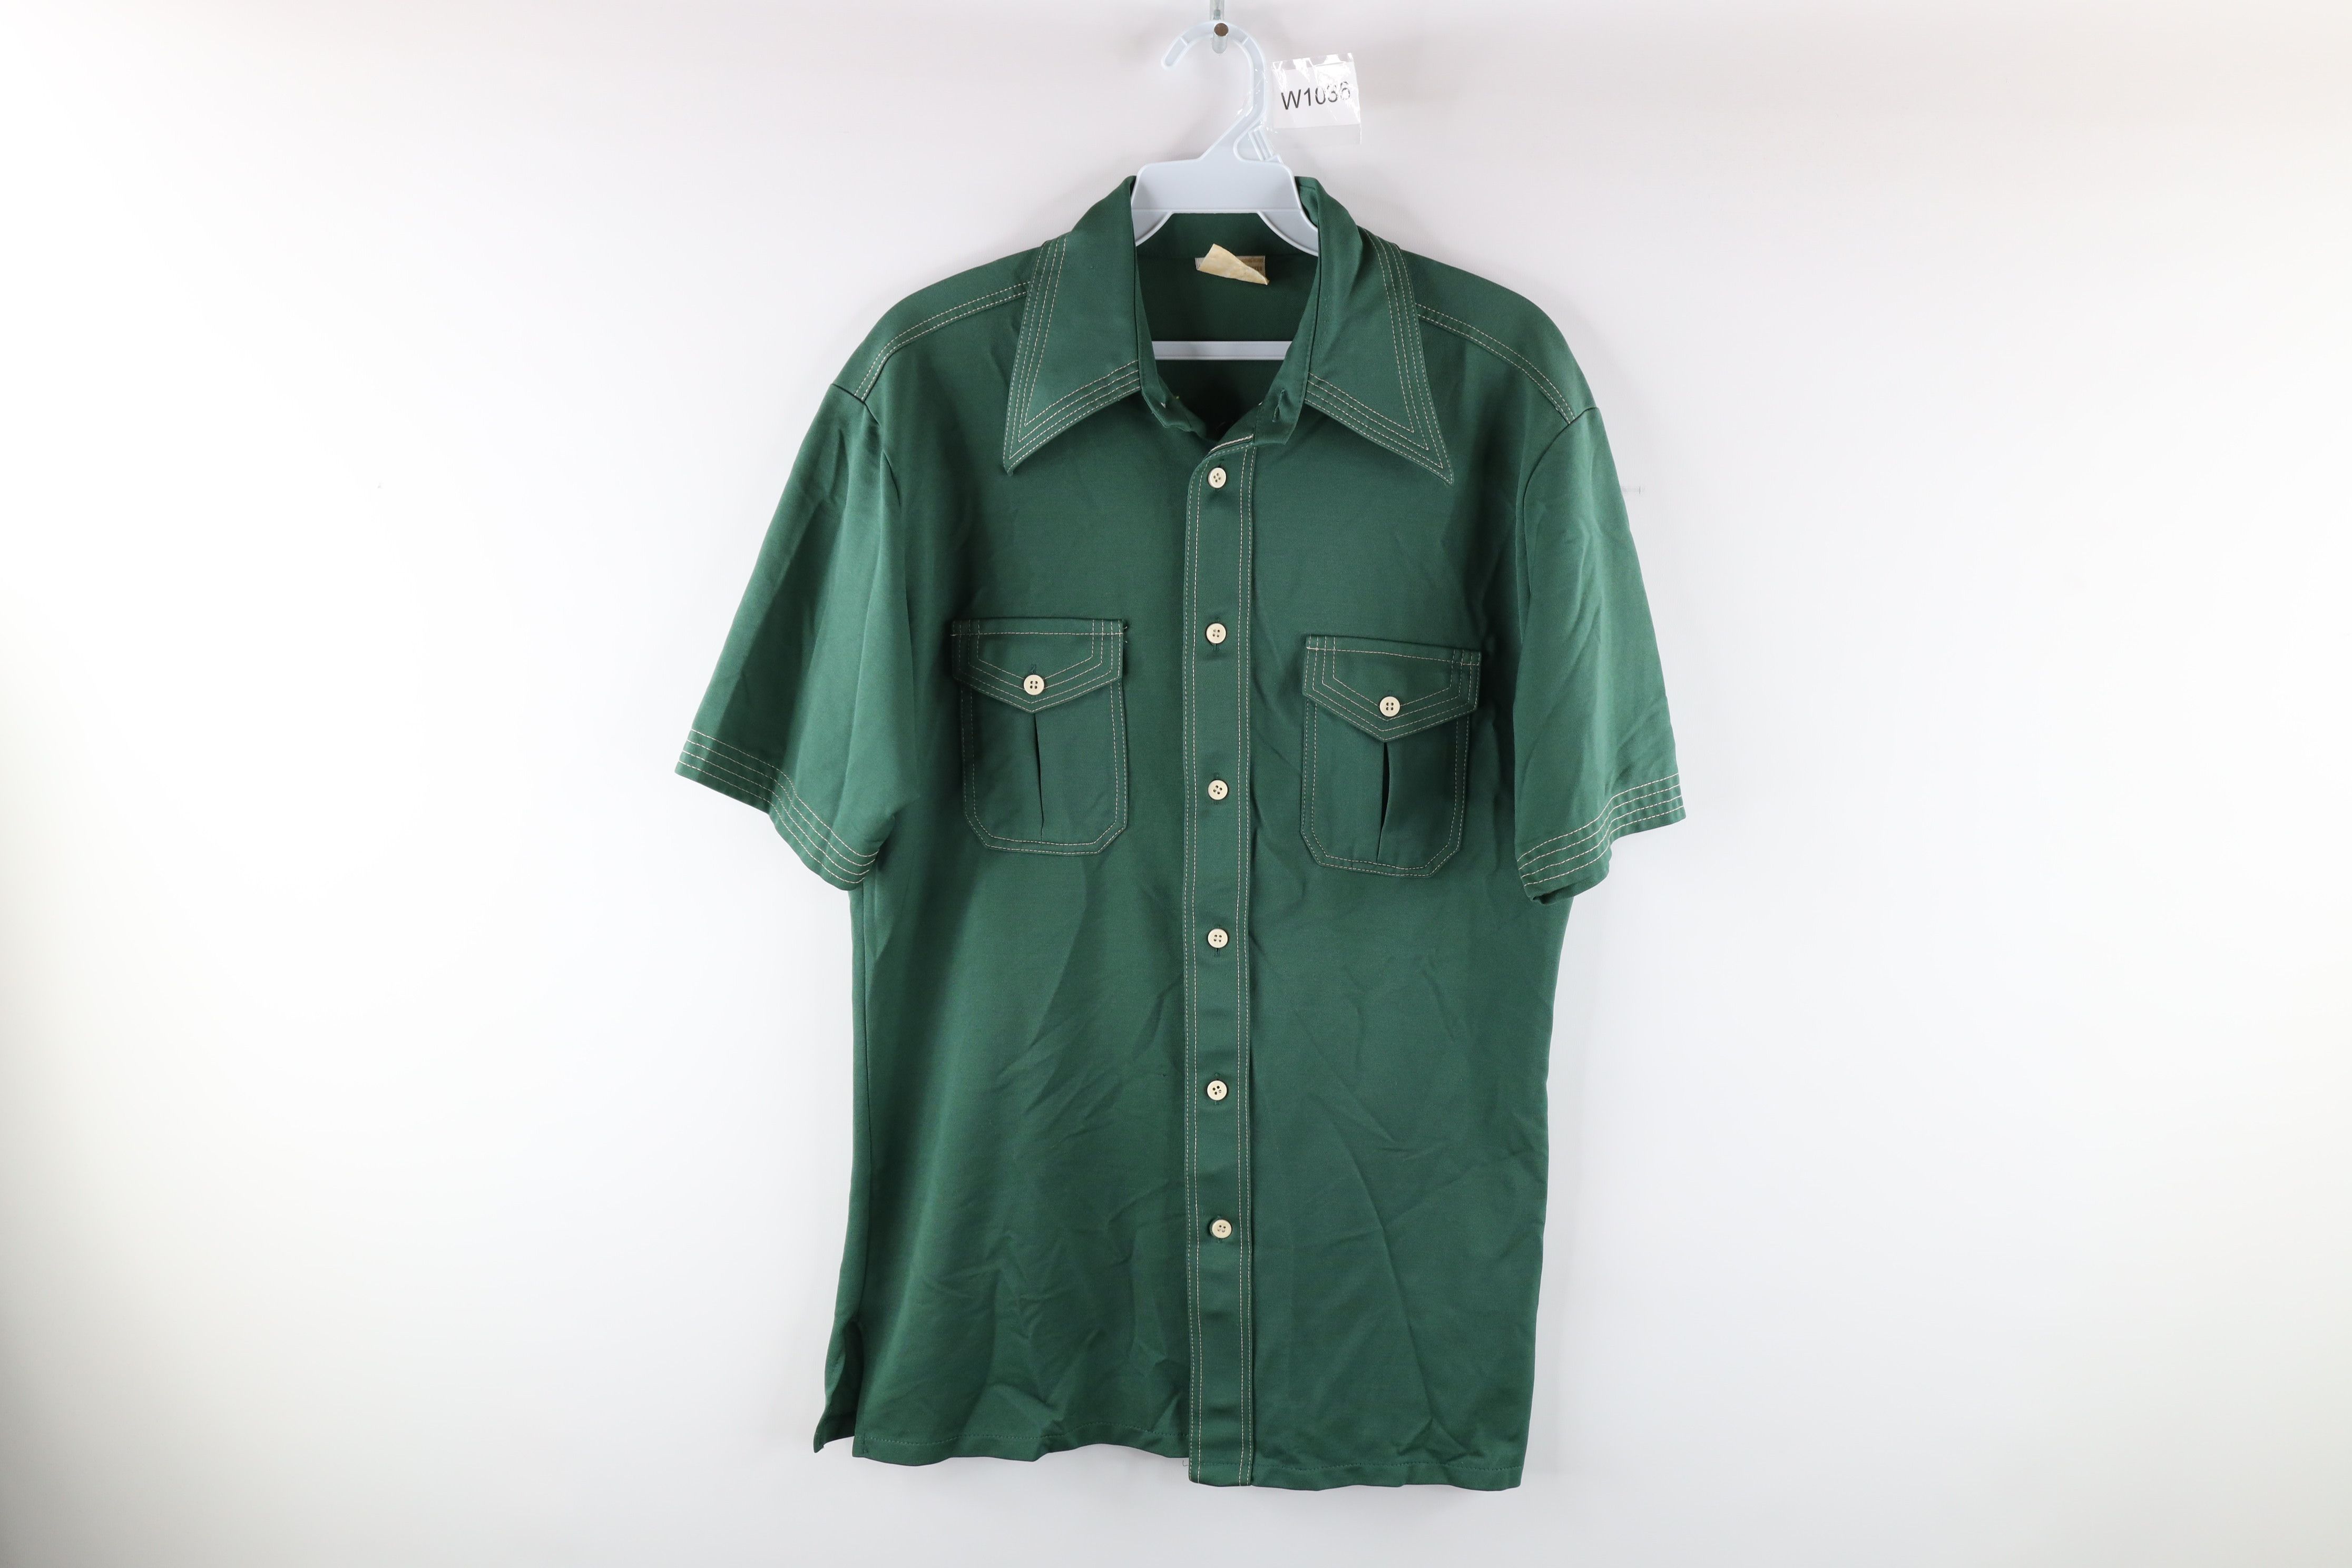 Vintage Vintage 60s Rockabilly Knit Collared Button Shirt Green Size US M / EU 48-50 / 2 - 1 Preview